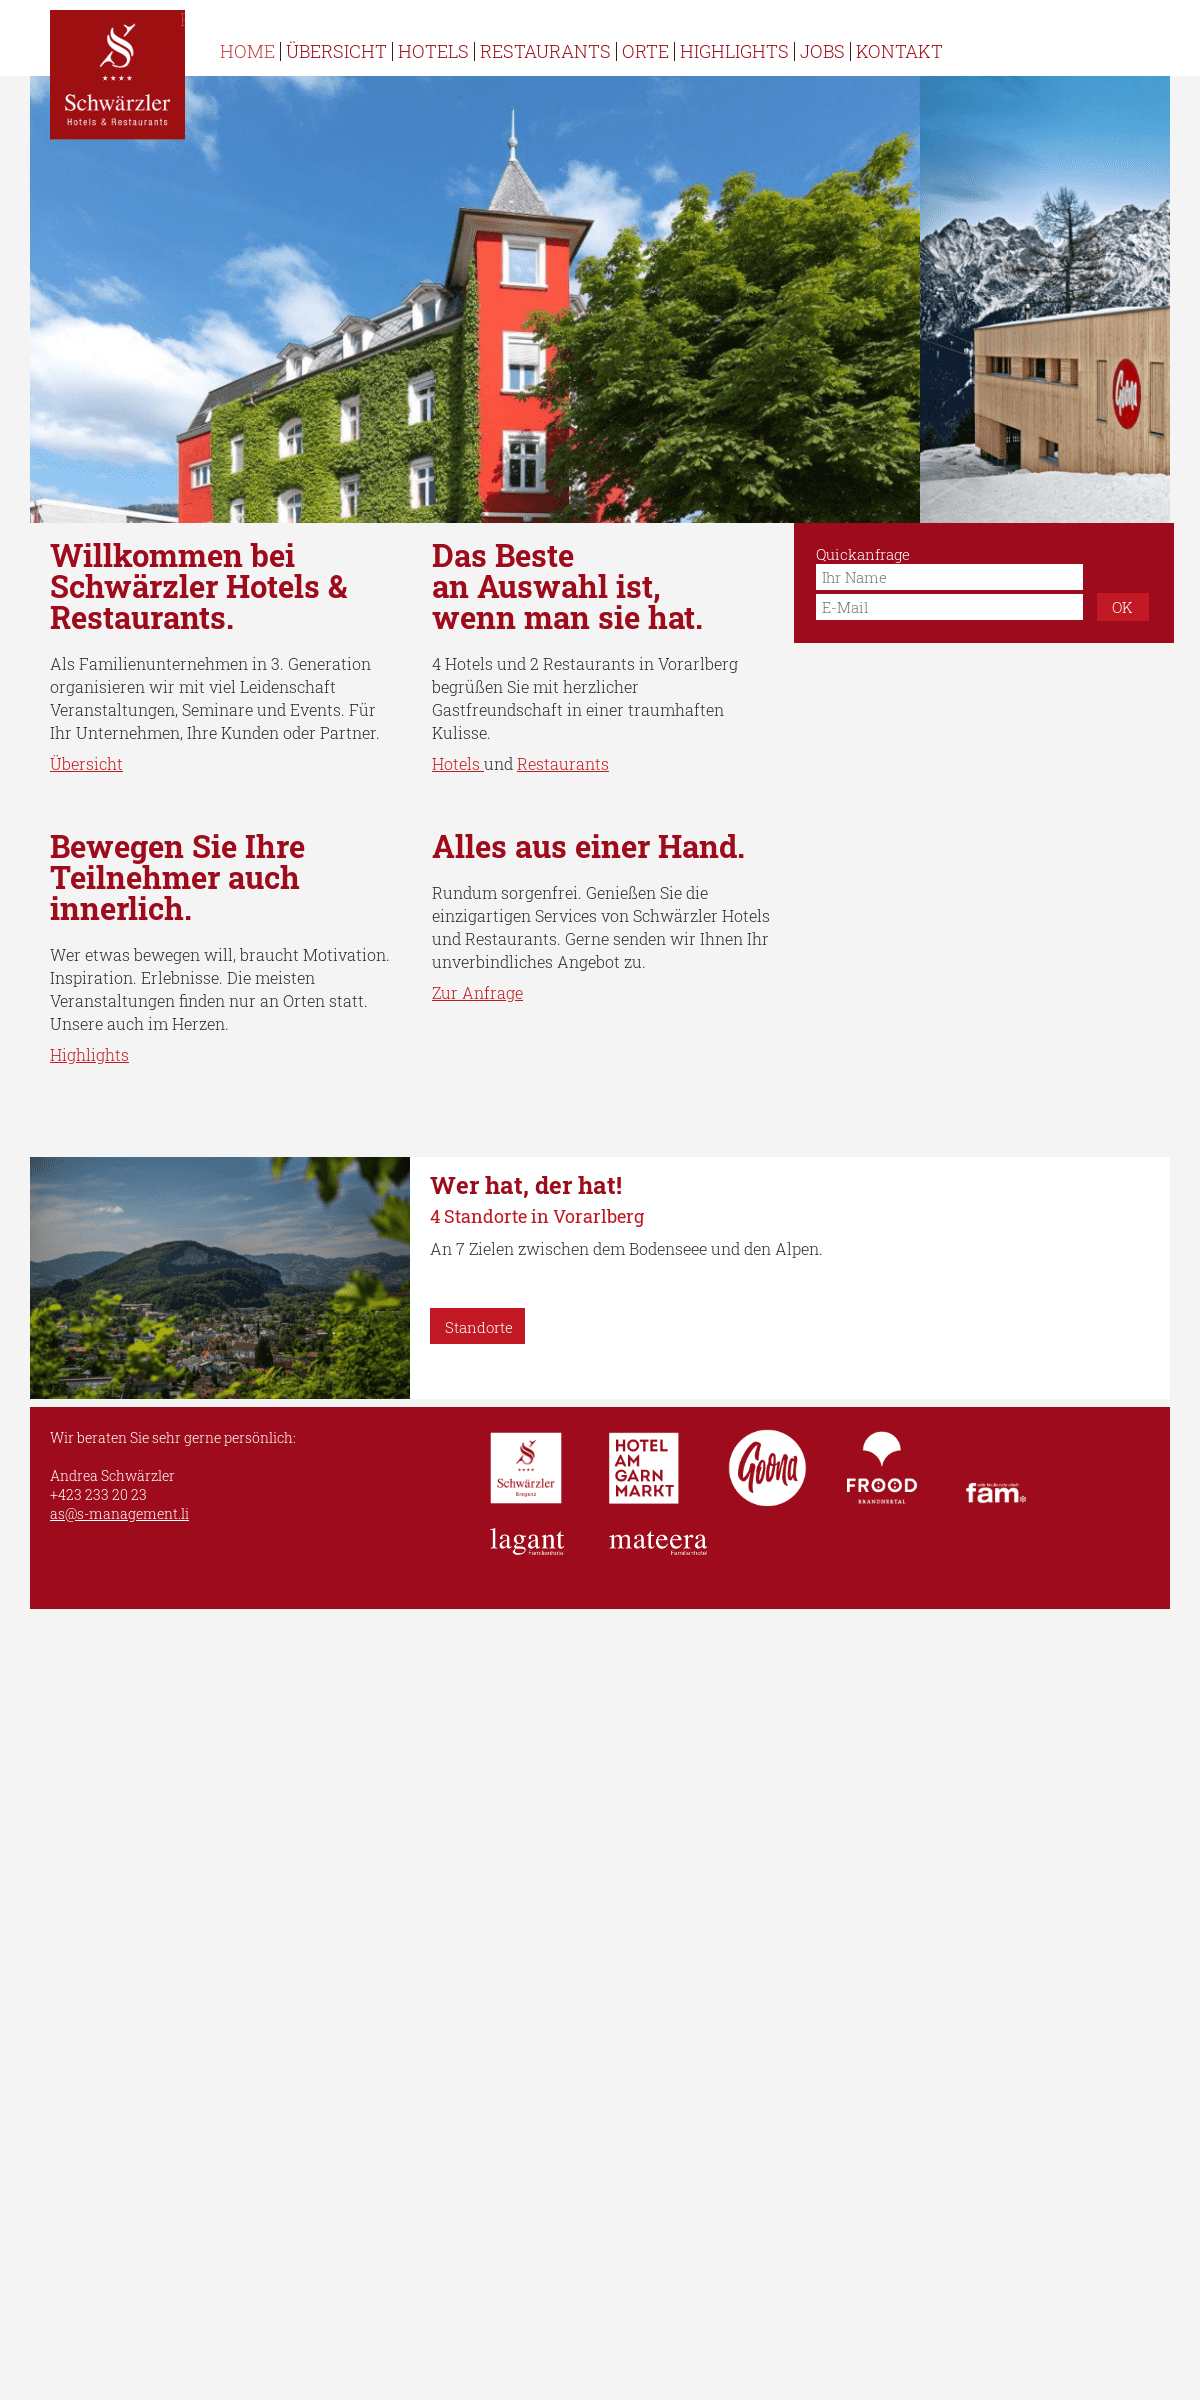 A complete backup of s-hotels.com